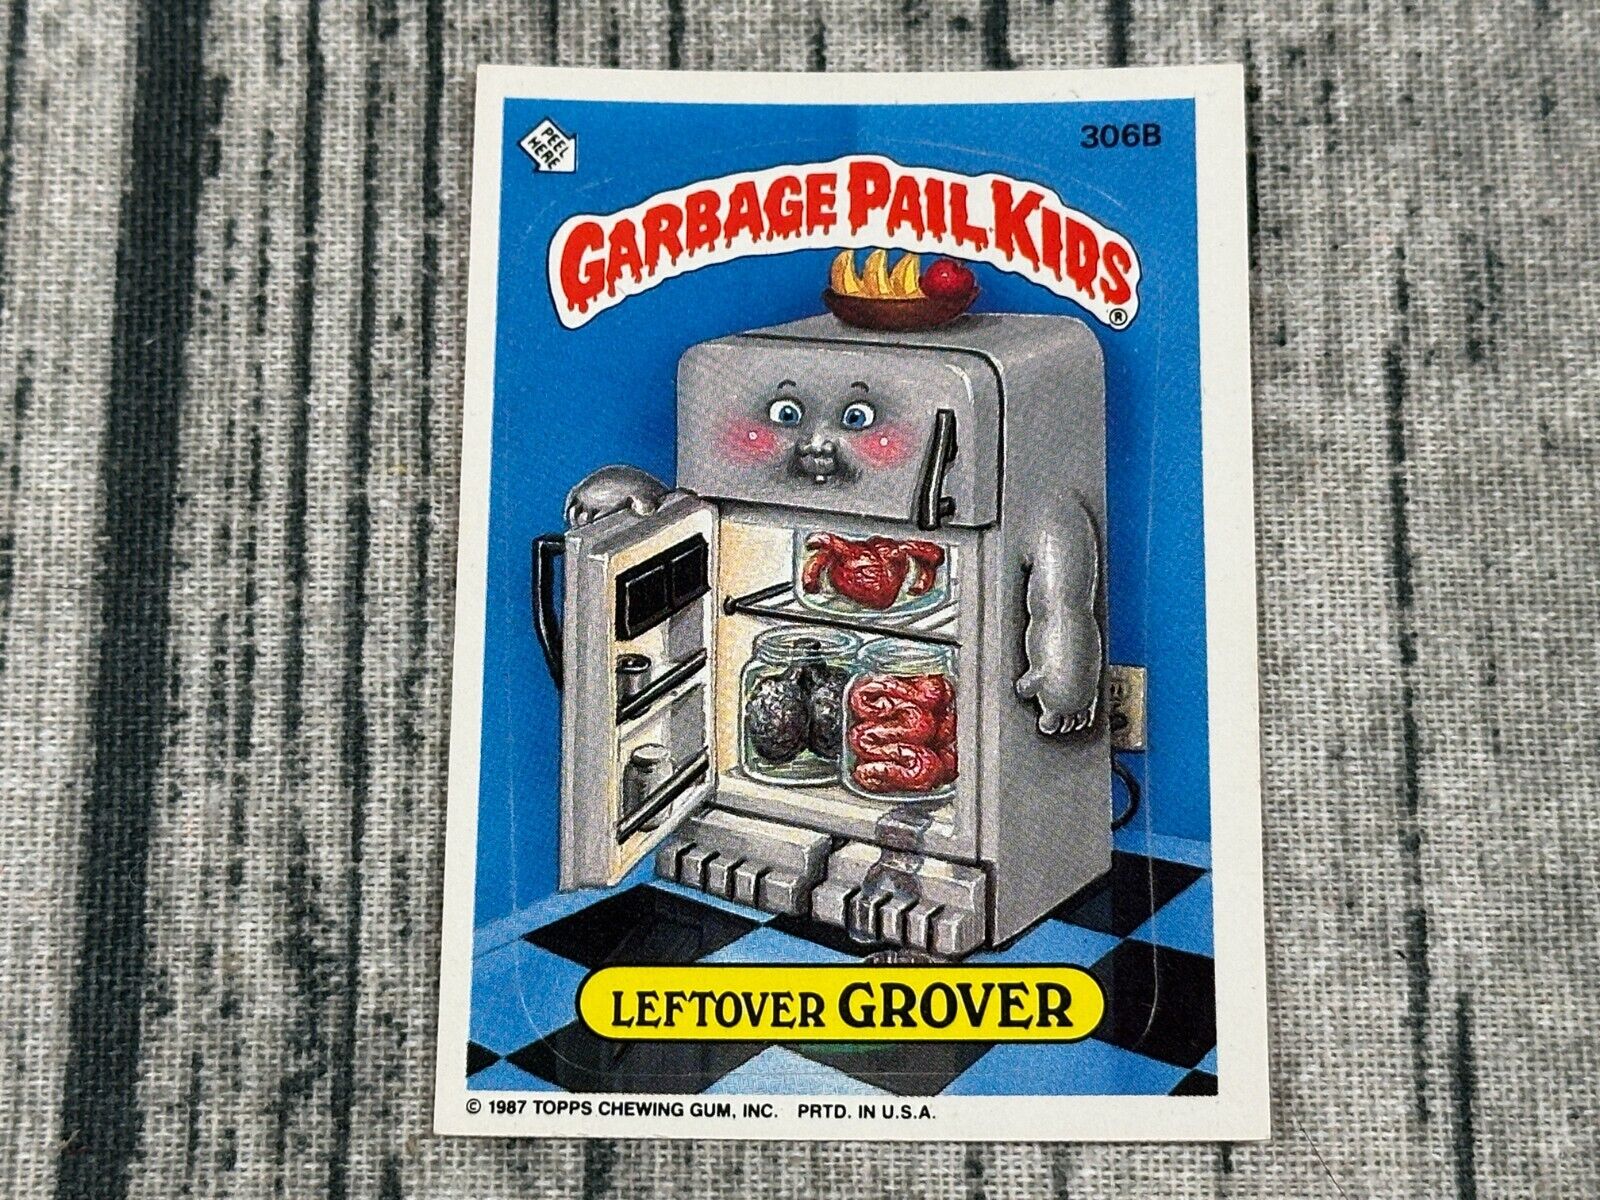 Garbage Pail Kids #306b Leftover Grover Topps 1987 Trading Sticker Card